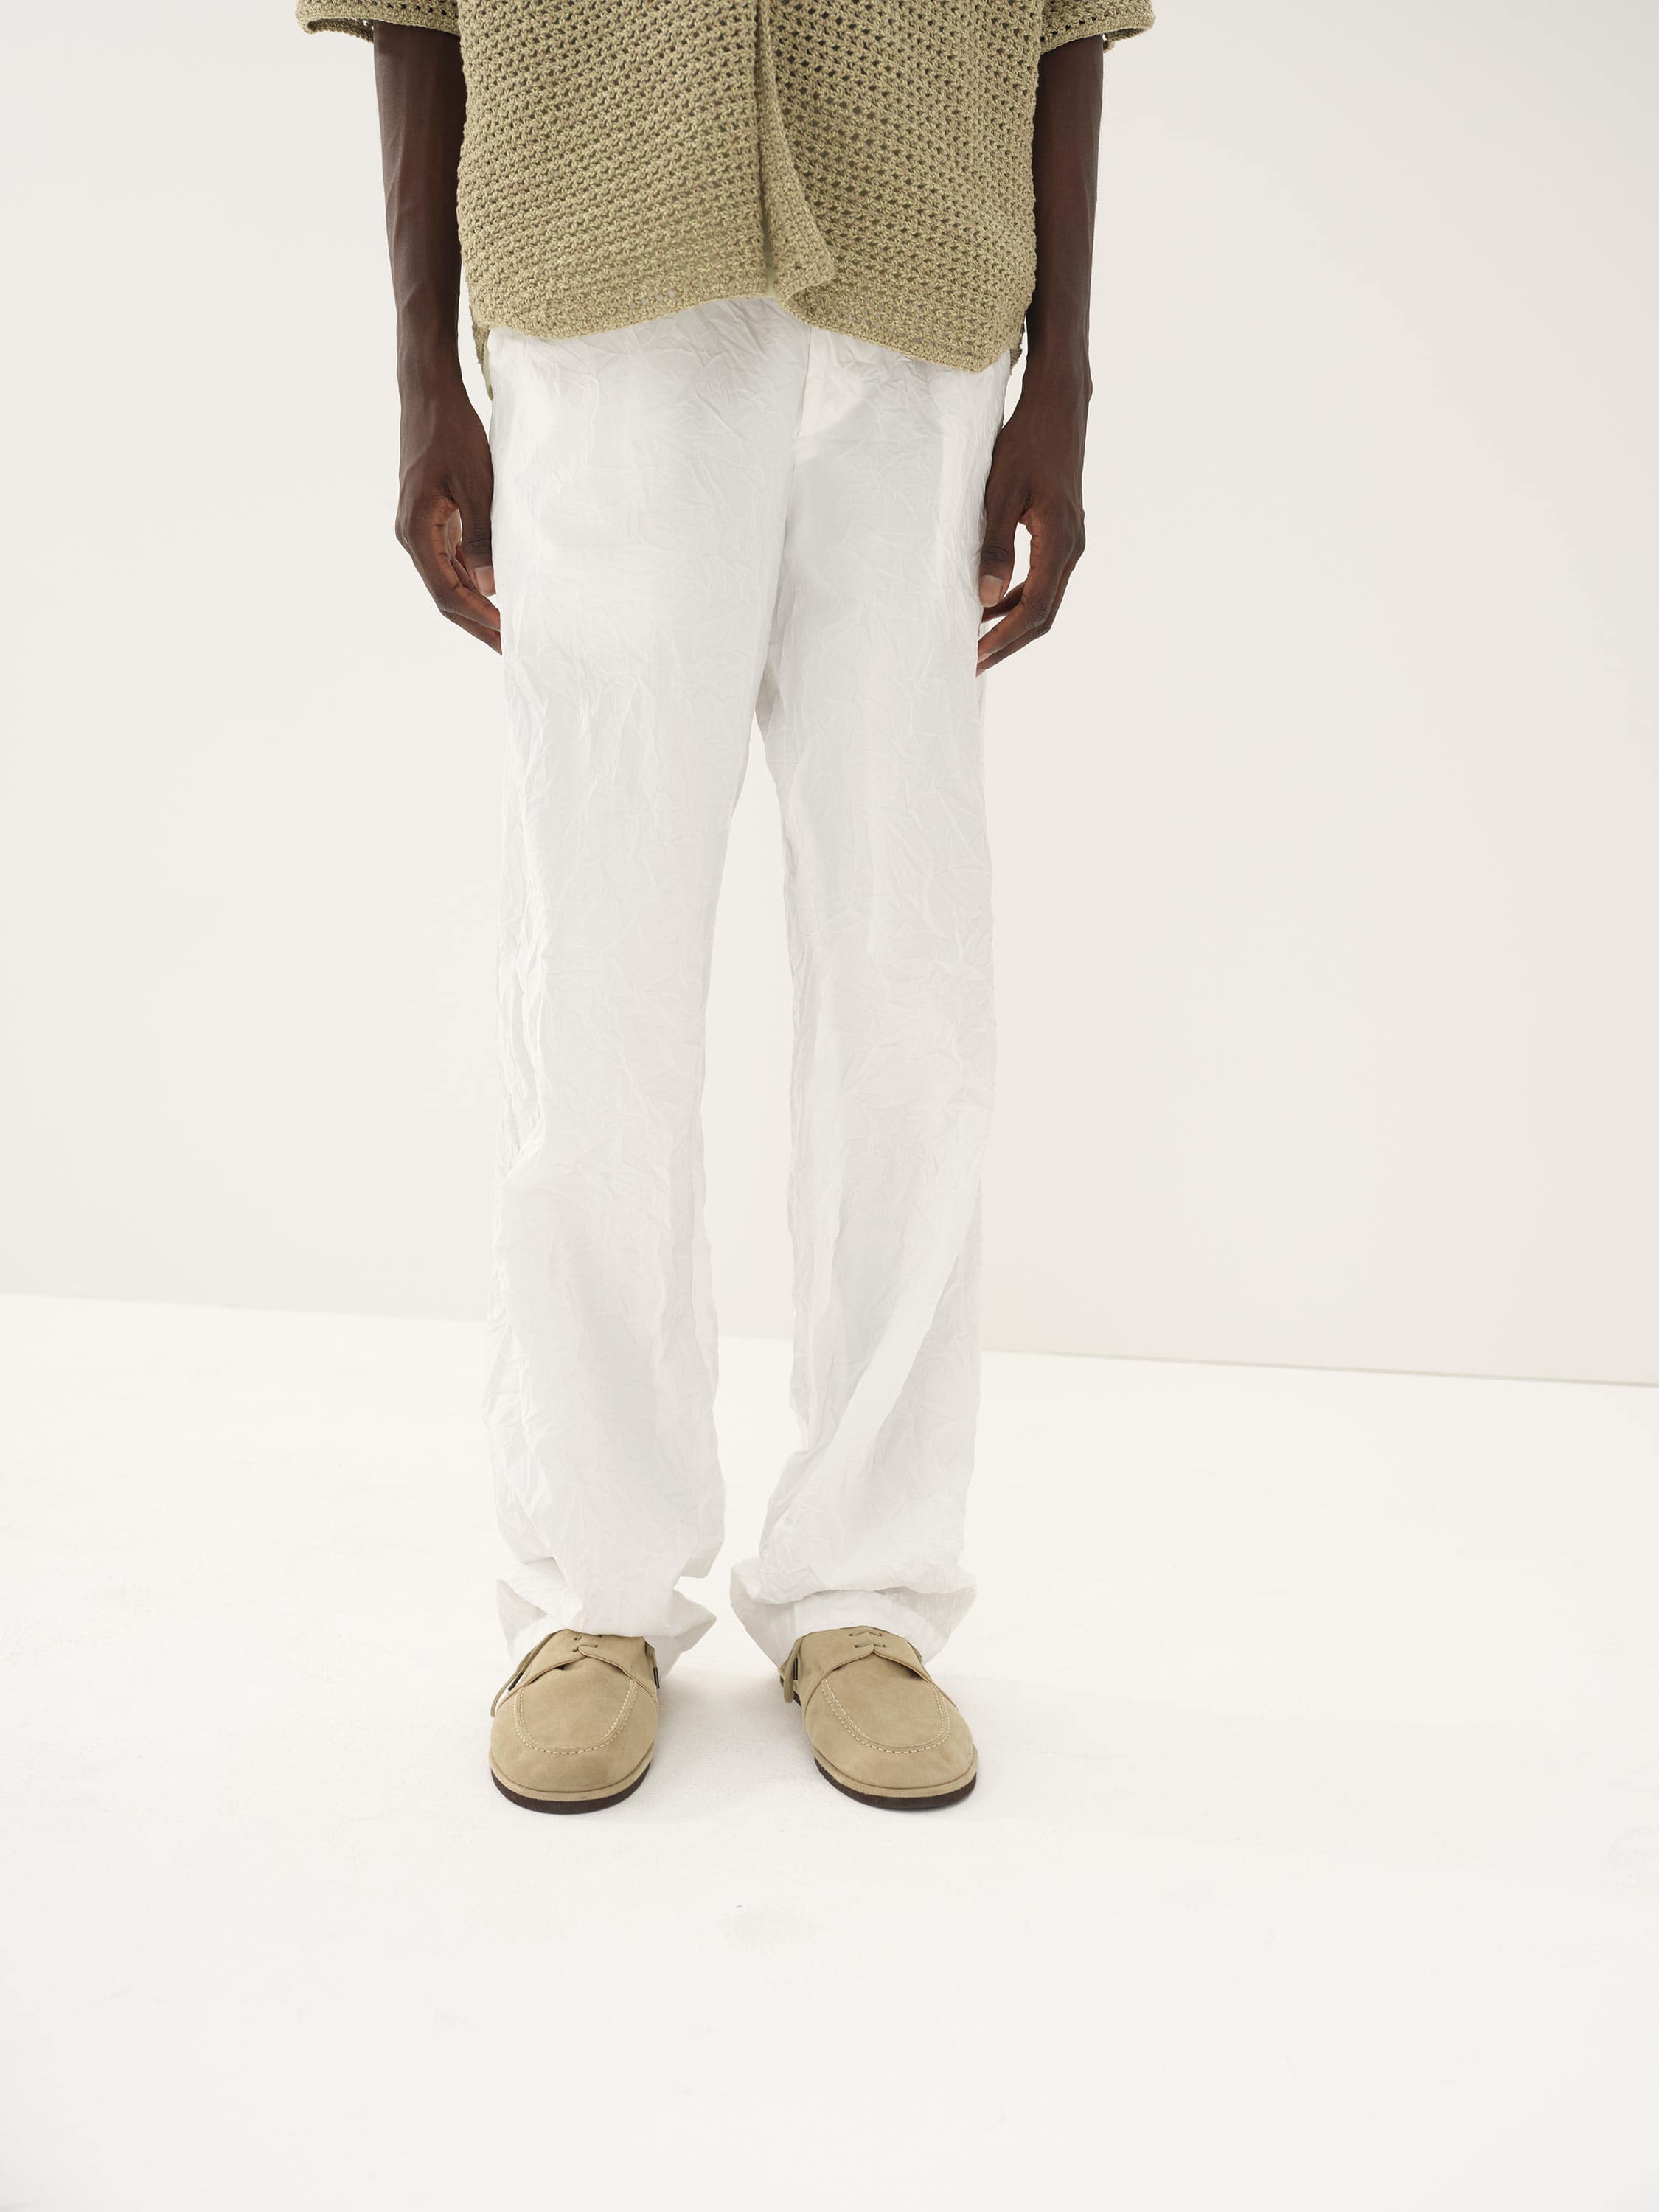 WRINKLED WASHED FINX TWILL PANTS 詳細画像 WHITE 1